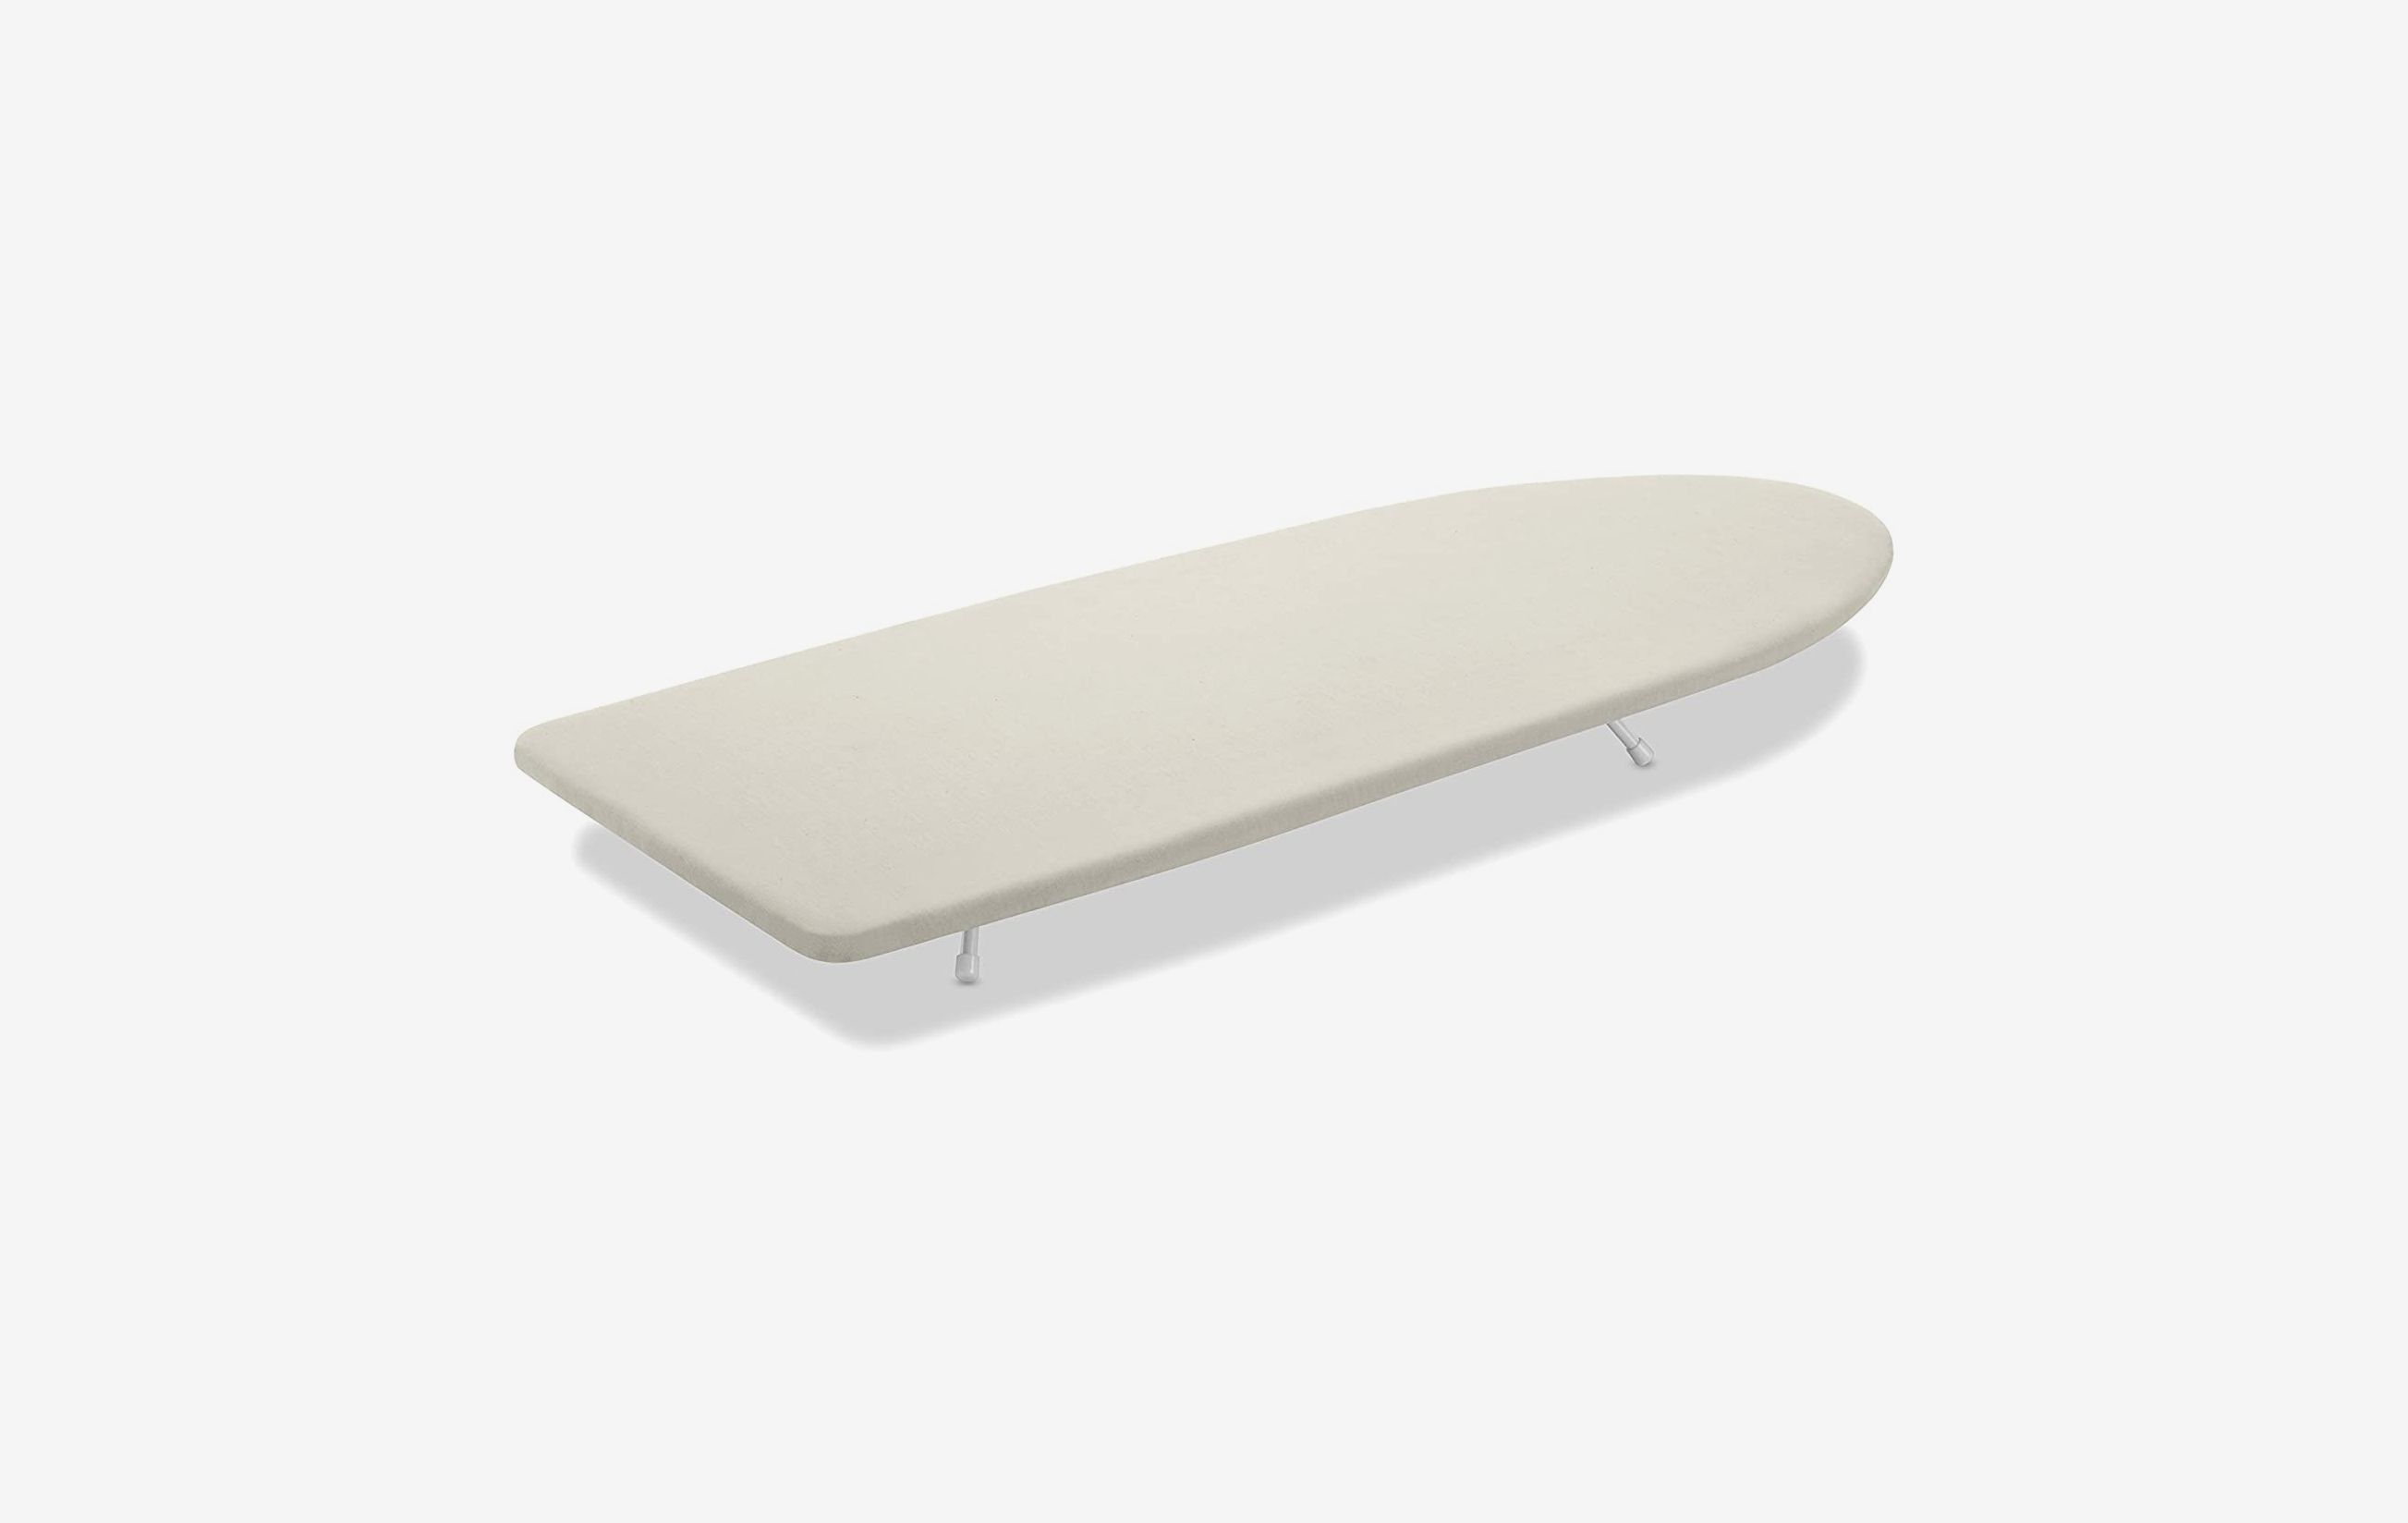 Blue HOMZ Premium Table Top Anywhere Ironing Board Cover and Pad 